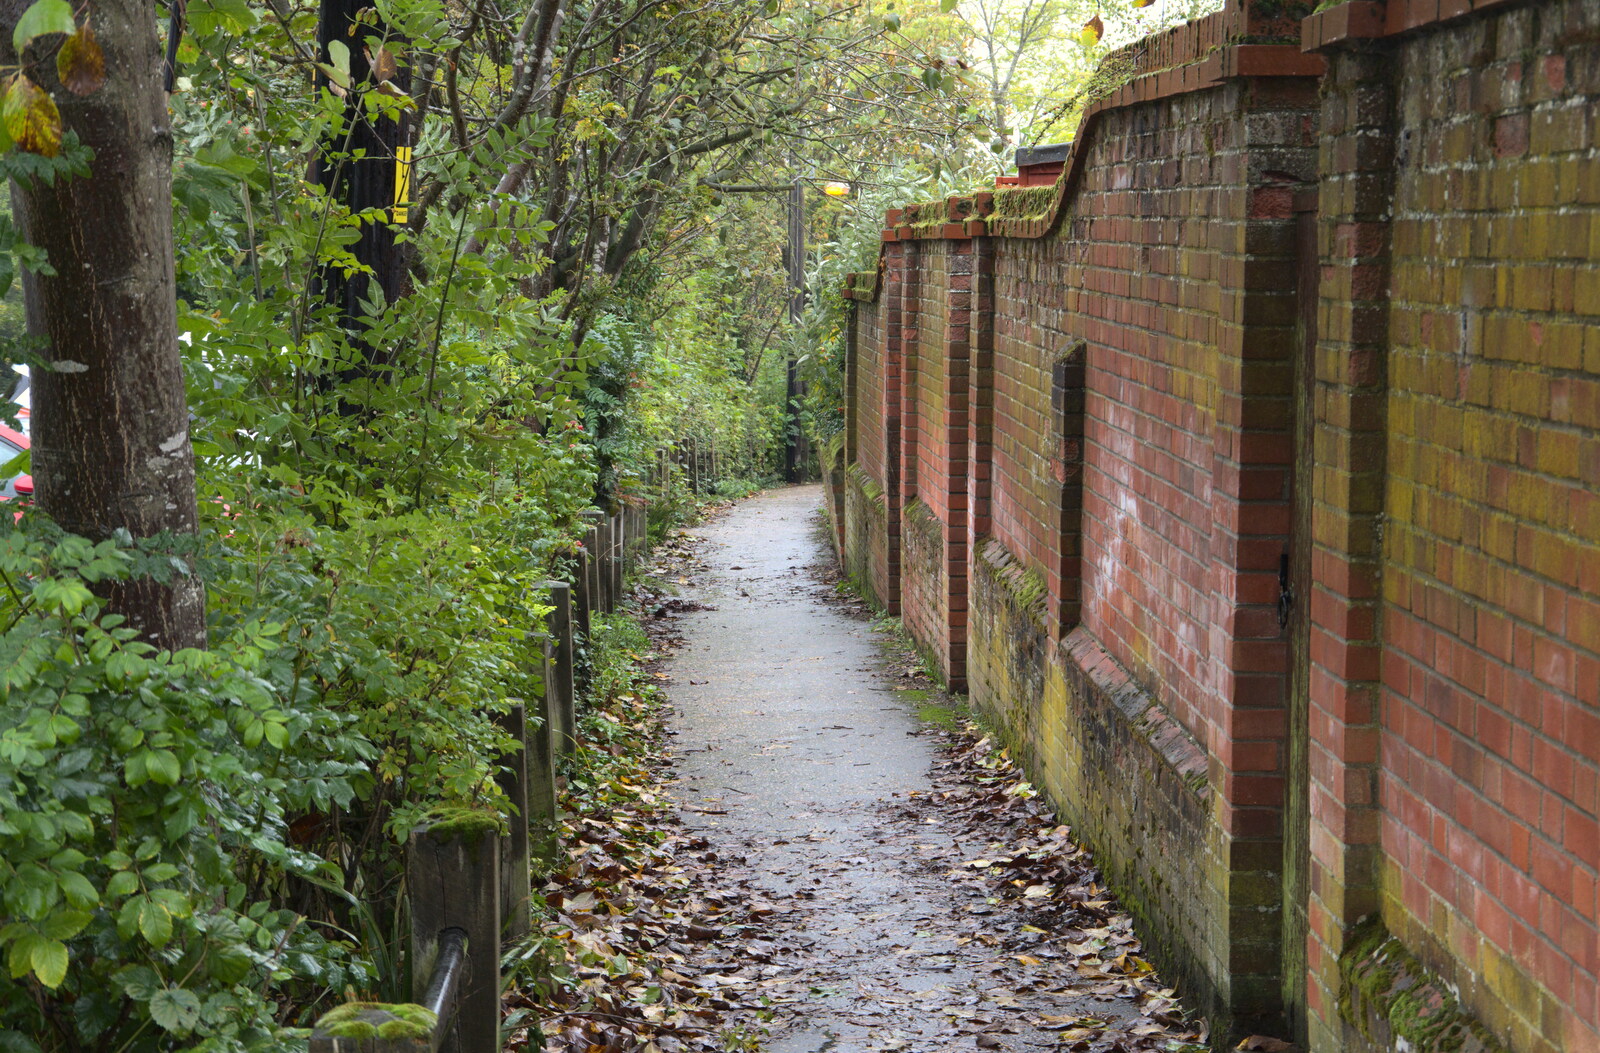 The path along the side of the car park from A Trip to Diss and Station 119, Eye, Suffolk - 26th September 2020